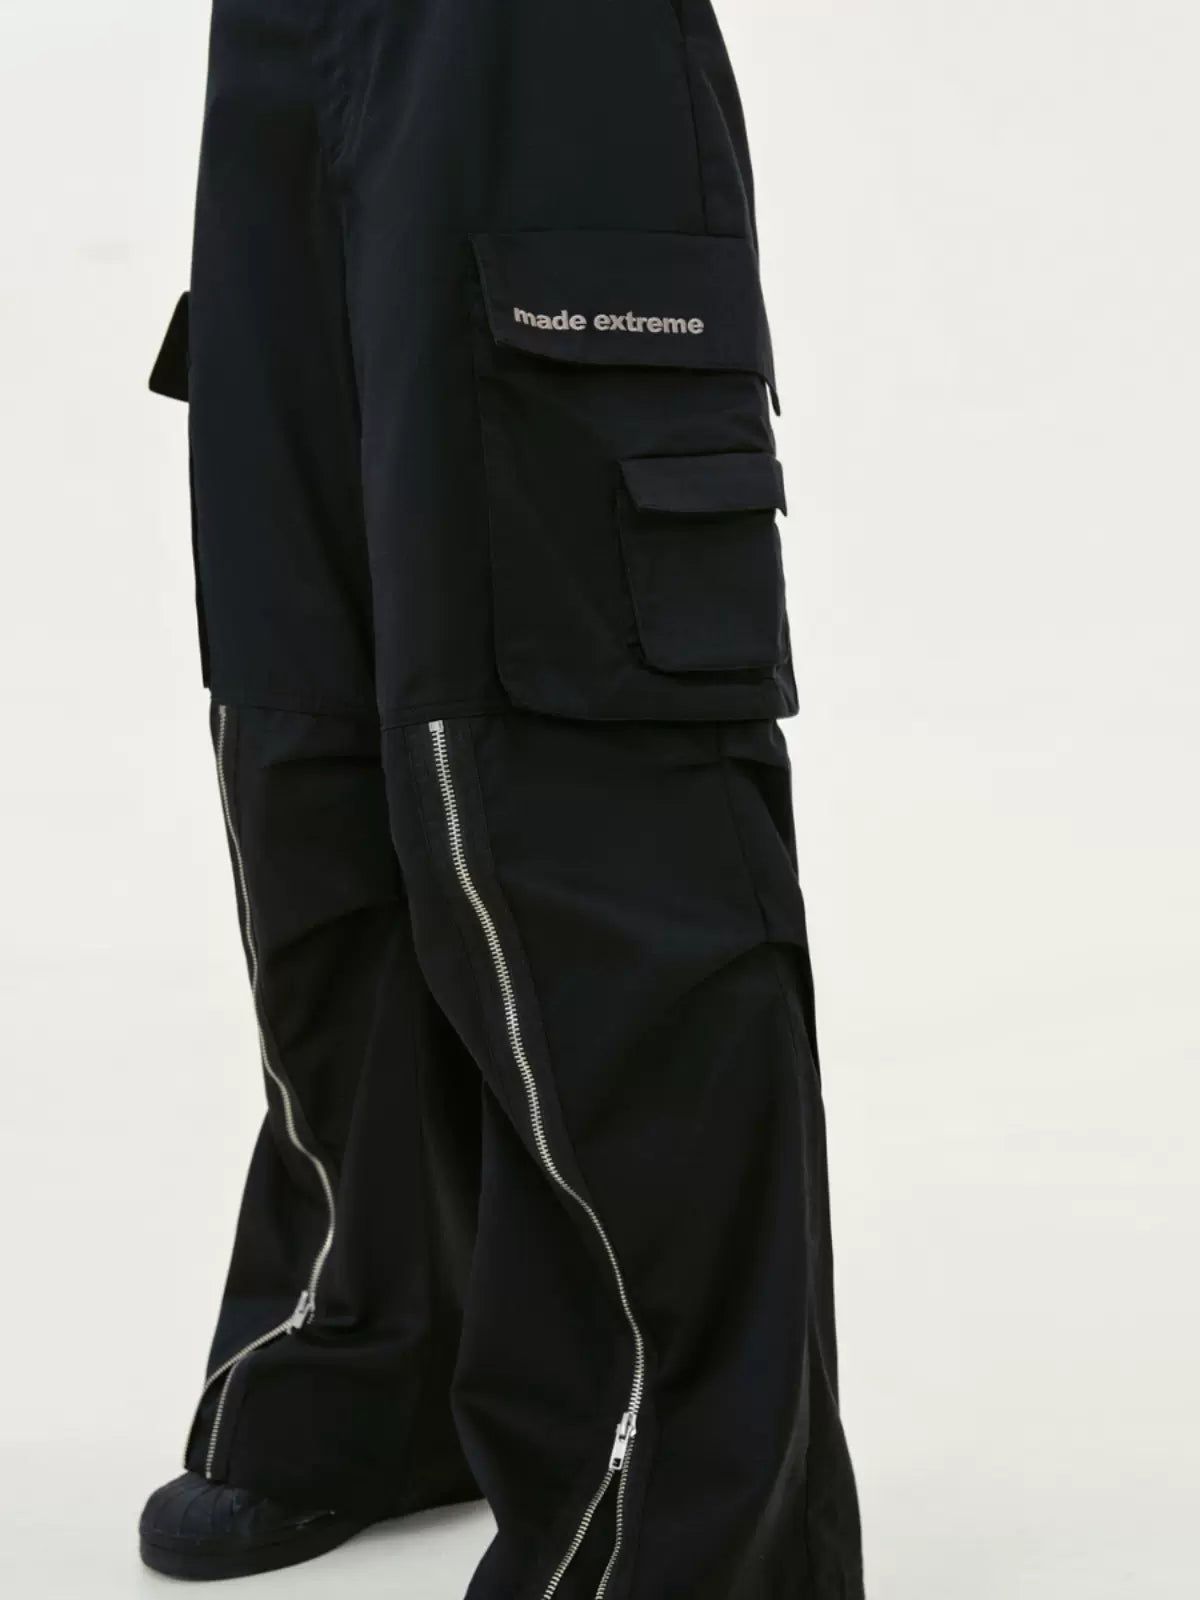 Multi-Flap Detail Cargo Pants Korean Street Fashion Pants By Made Extreme Shop Online at OH Vault